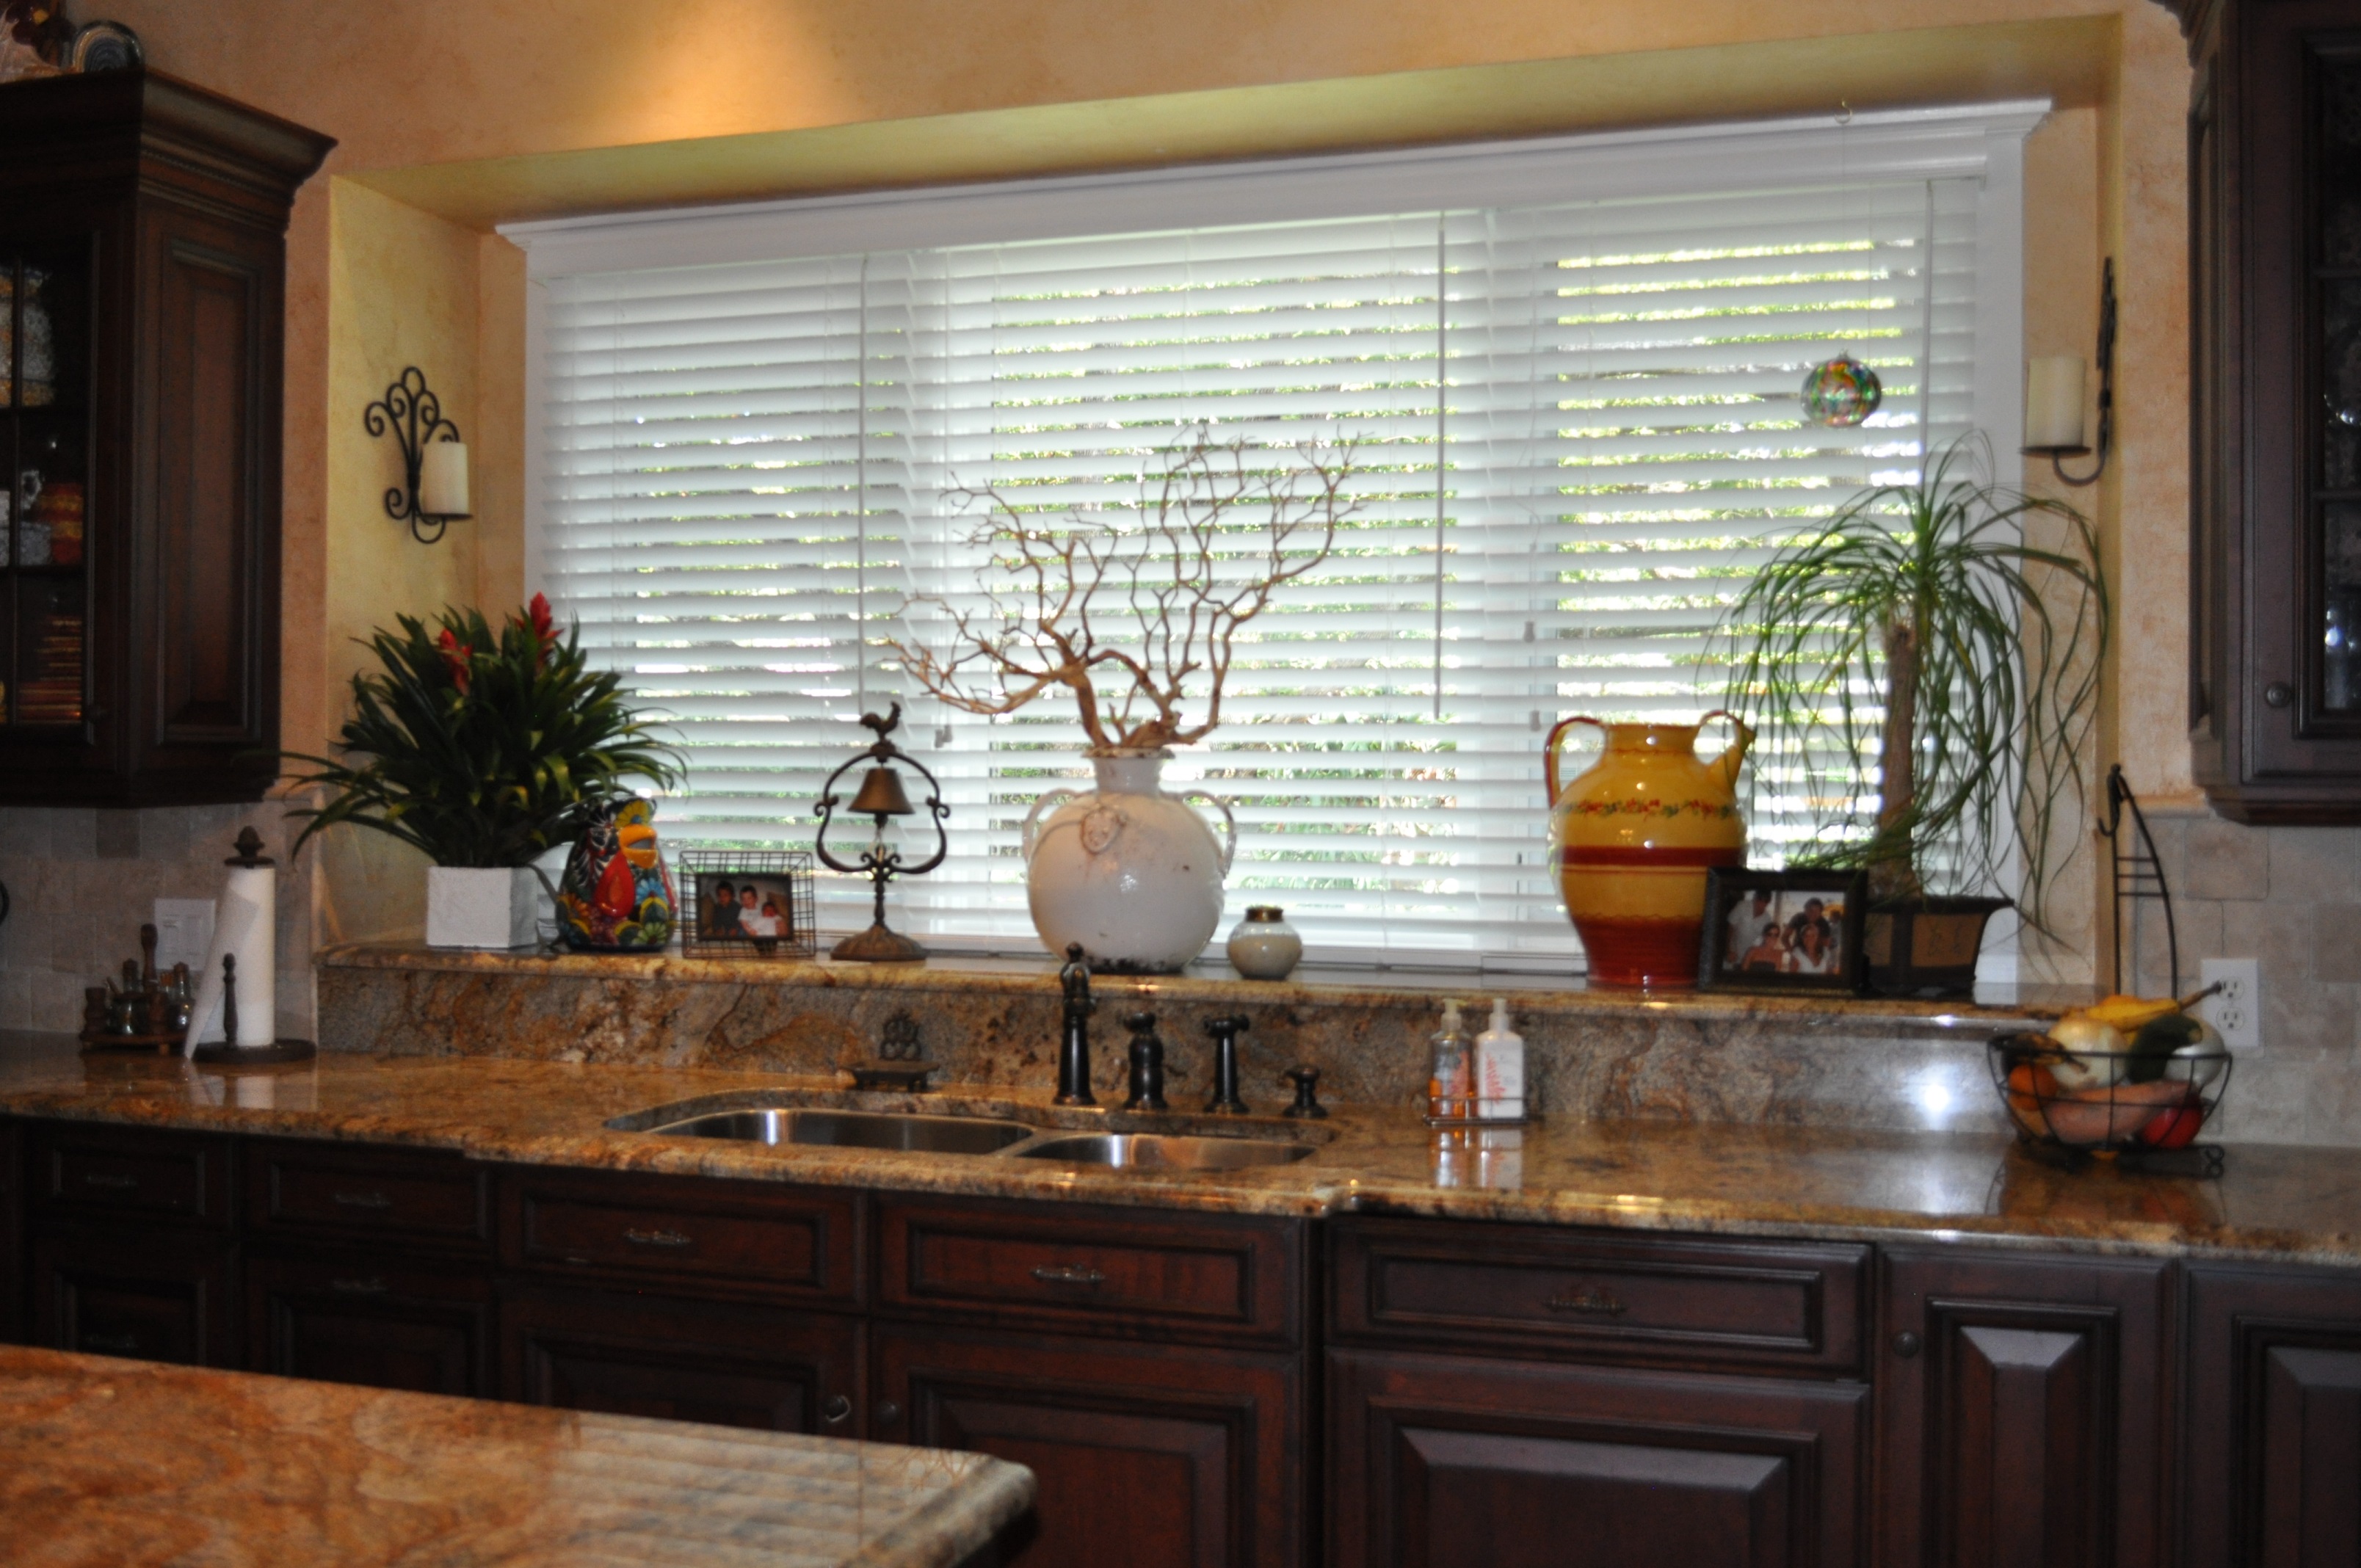 plantation shutters Clearwater, window blinds, roller shades